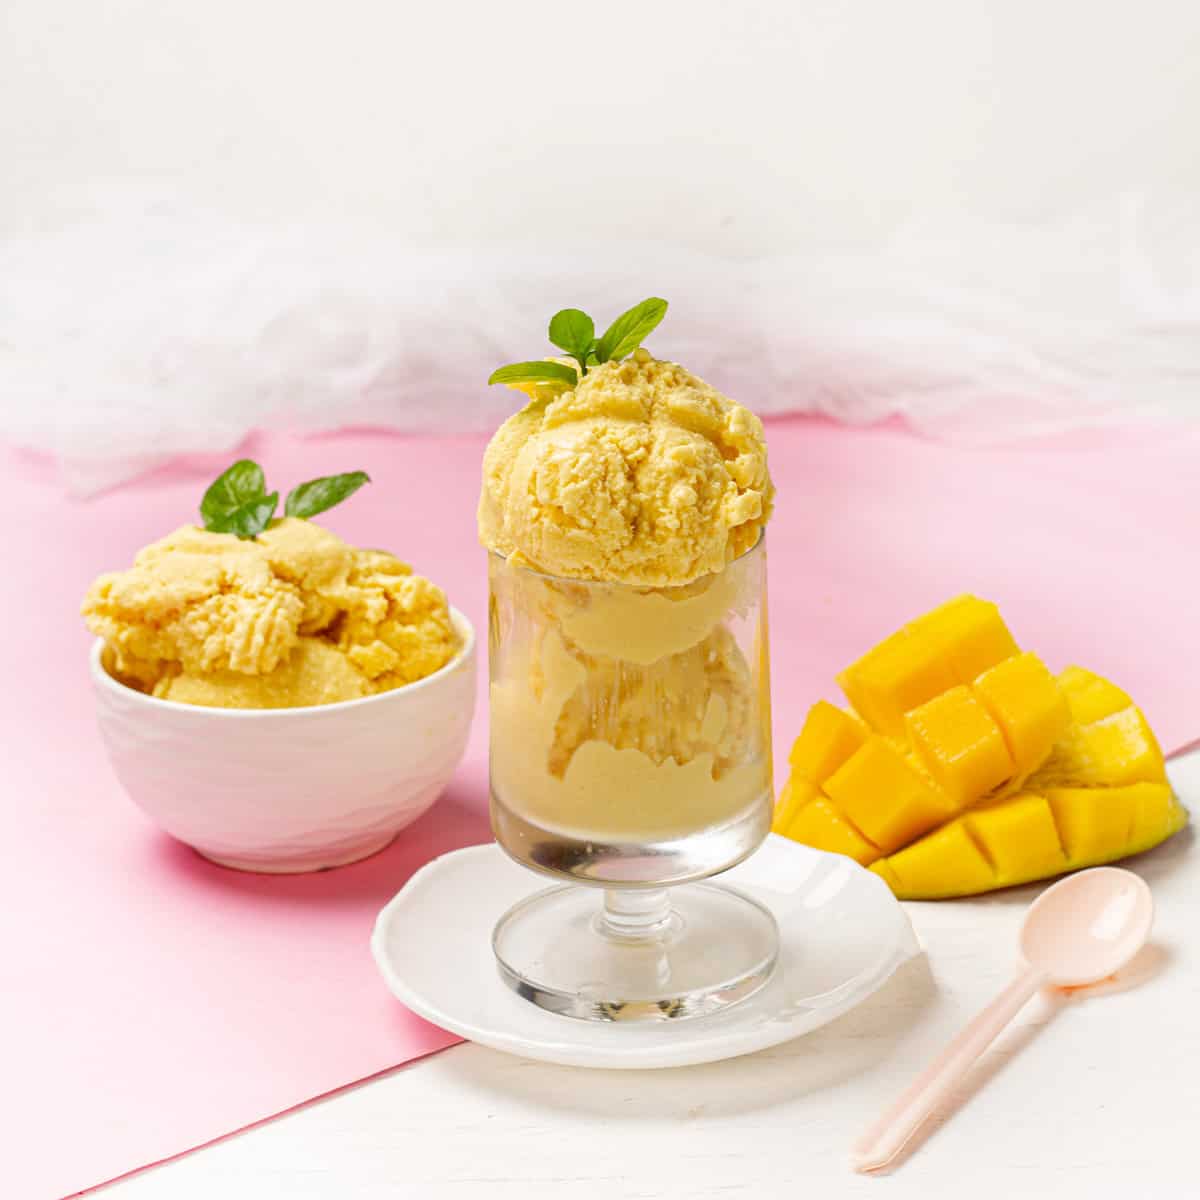 Creamy Mango and Coconut Ice Cream served in a bowl and glass with mango